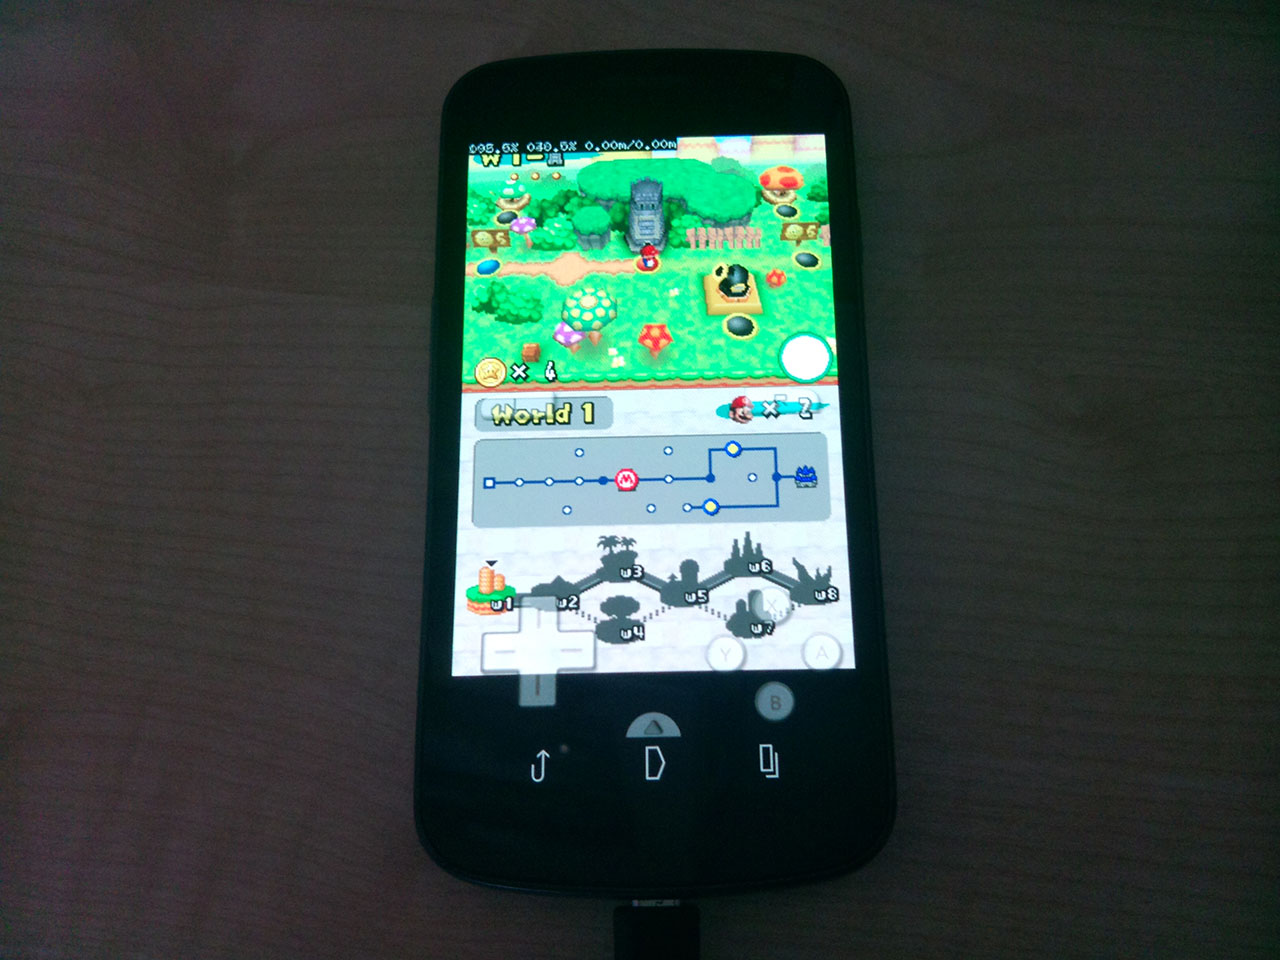 Drastic An Nintendo Ds Emulator For Android Devices Digiex